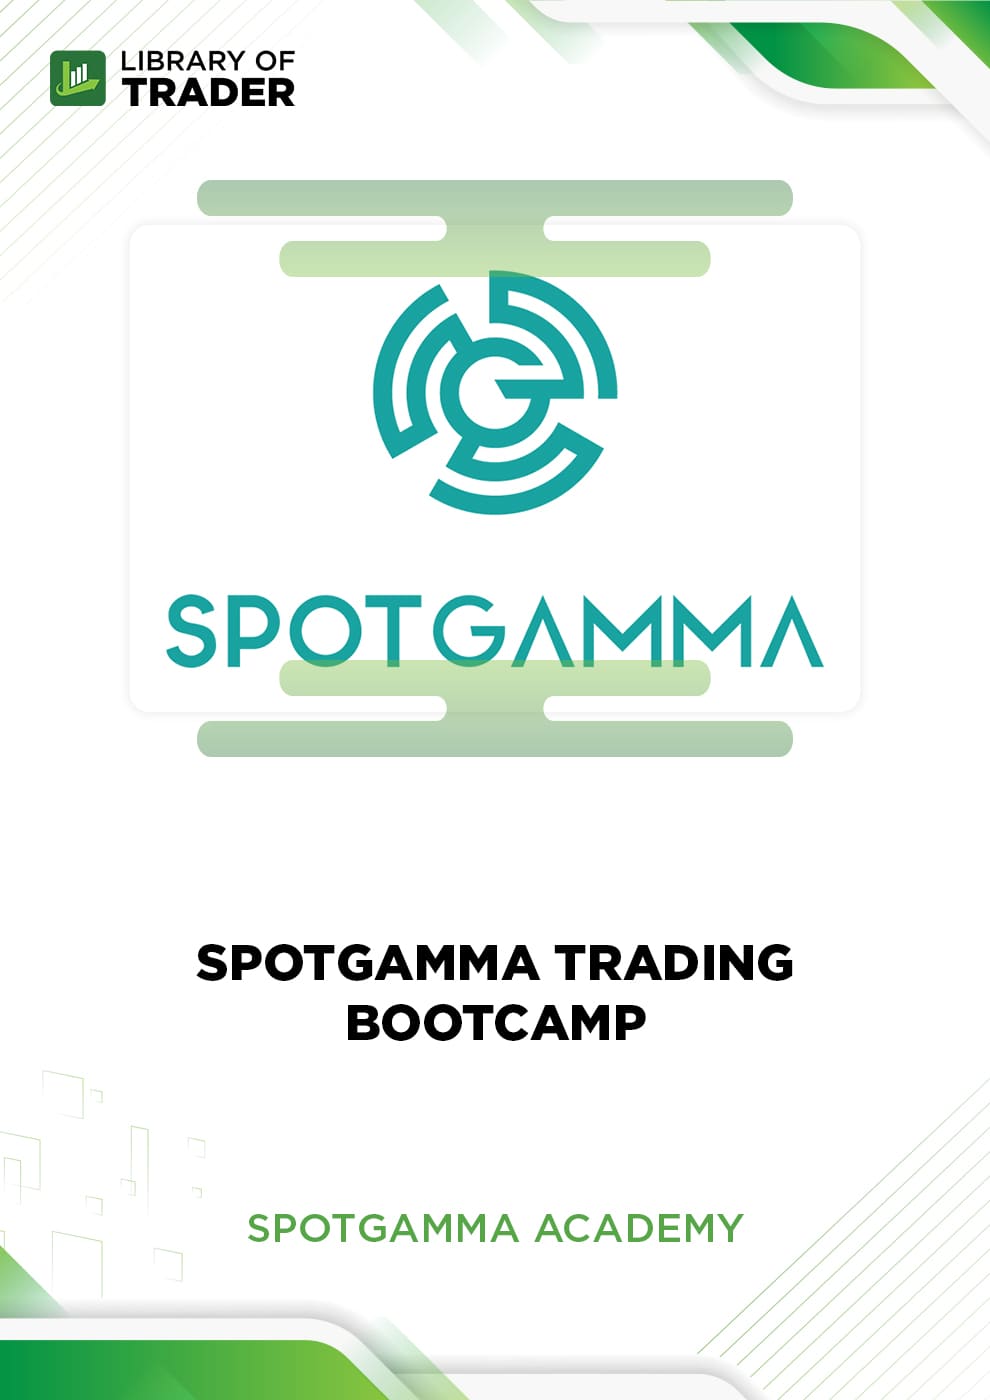 SpotGamma Trading Bootcamp by SpotGamma Academy